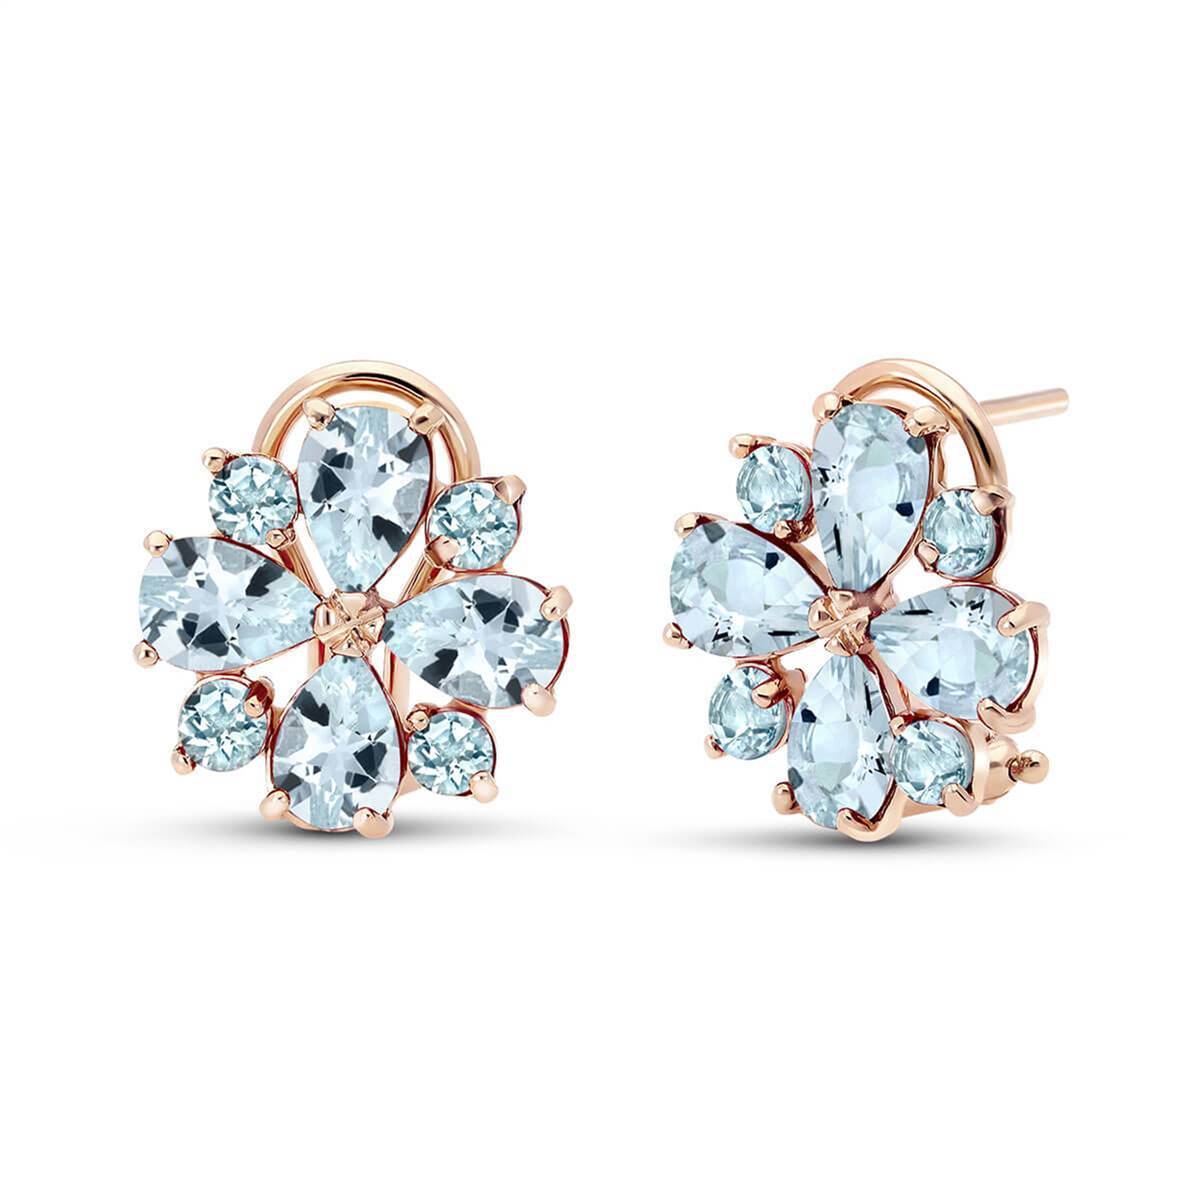 4.85 Carat 14K Solid Rose Gold French Clips Earrings Natural Aquamarine